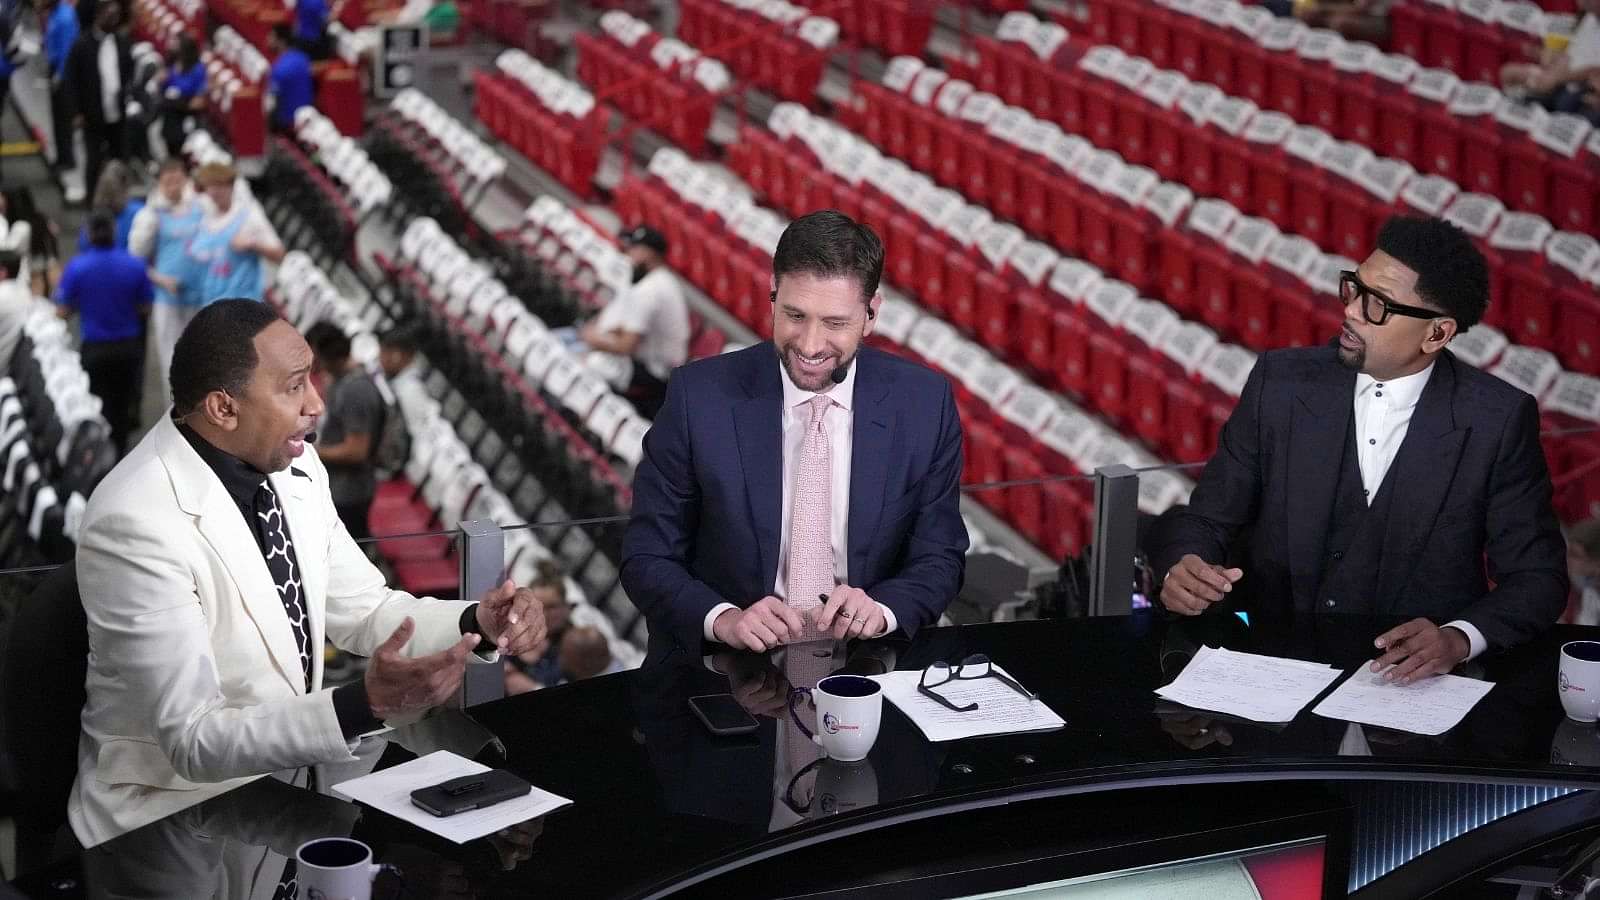 “Expectations for the rest of LeBron James career?” Stephen A. Smith and Co go off topic before Game 7 of ECF and NbA Twitter is on fire